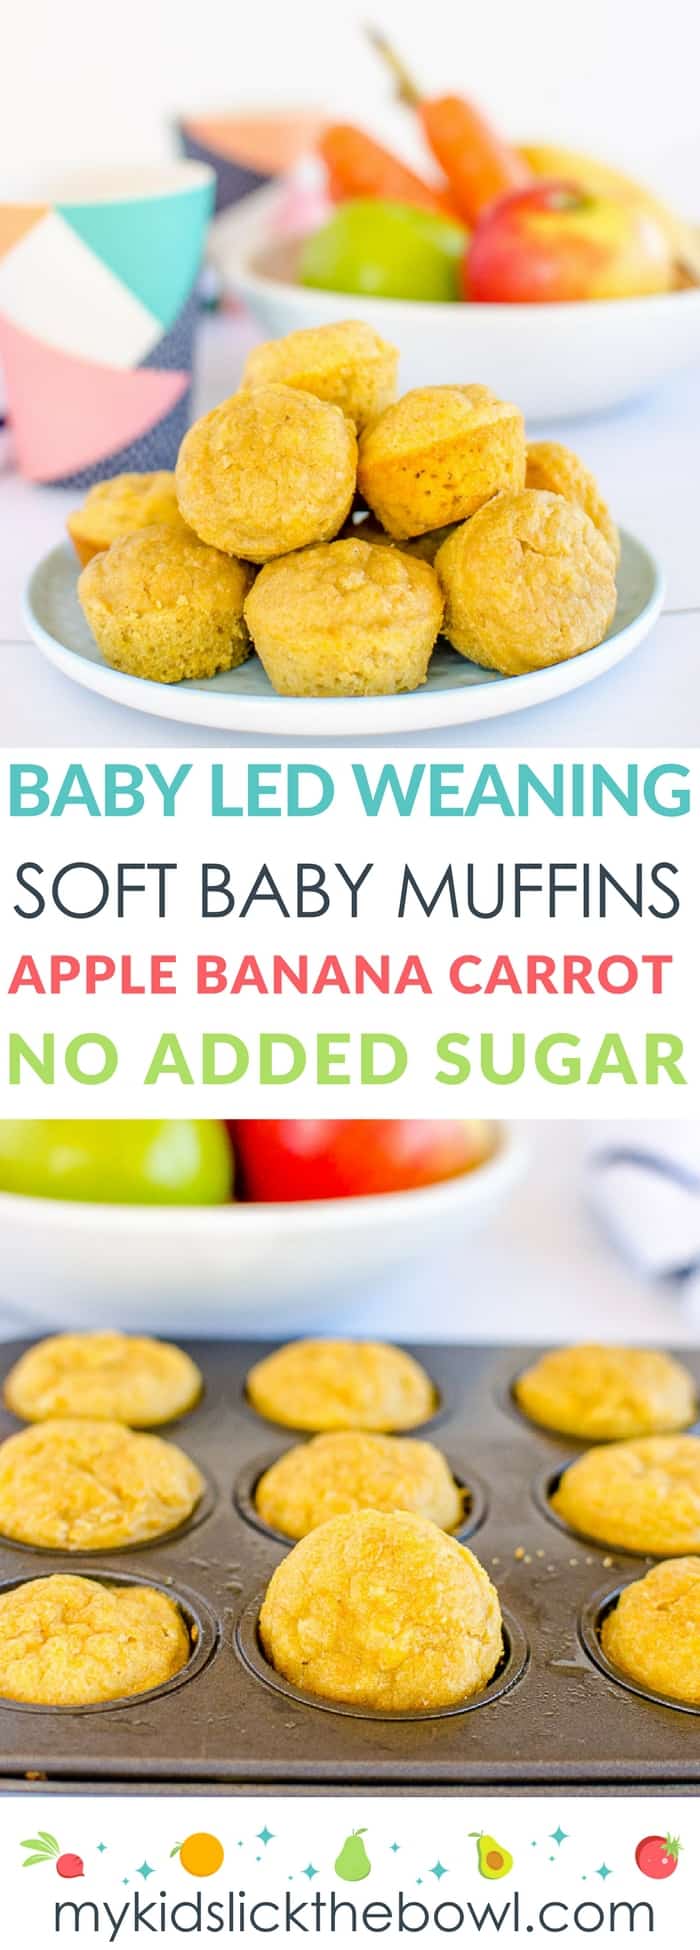 Baby Led Weaning Muffins Sugar Free Apple Banana Carrot,Free Baby Blanket Crochet Patterns